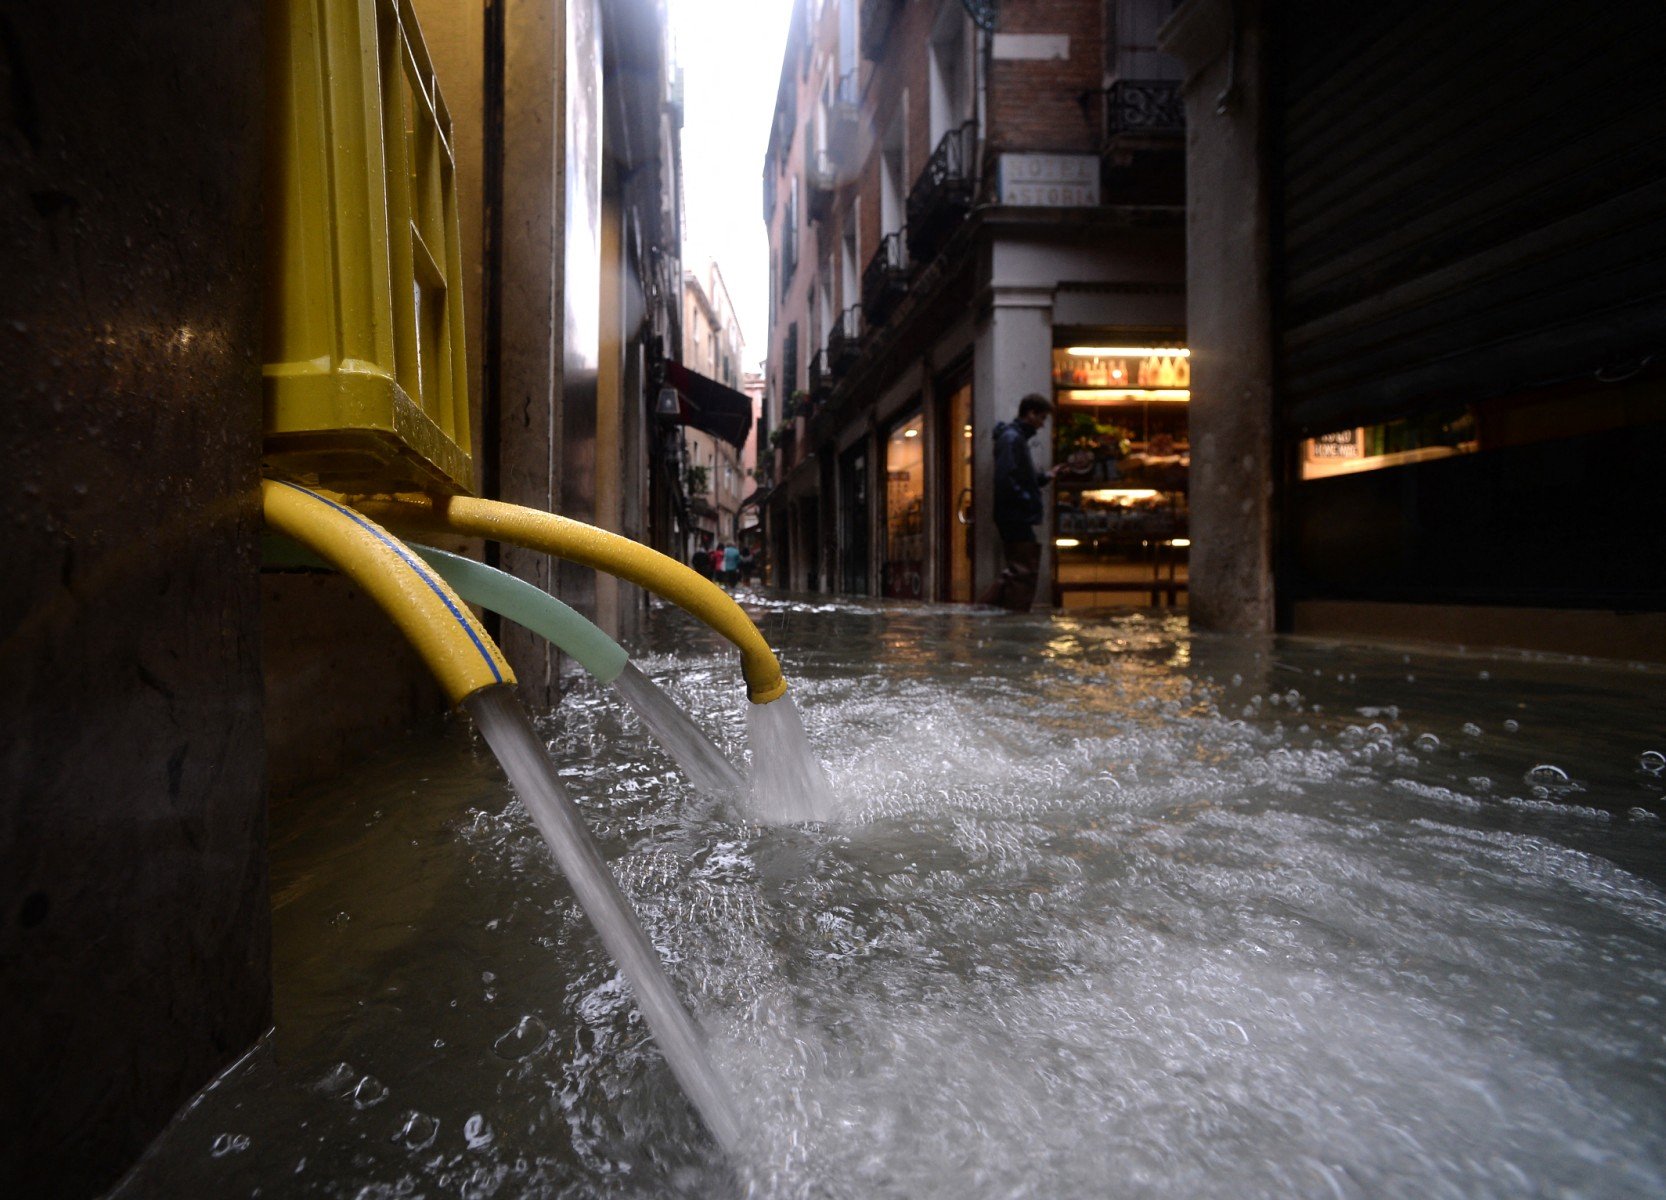 Hoses pump water out of a building in Venice following a severe high tide event.